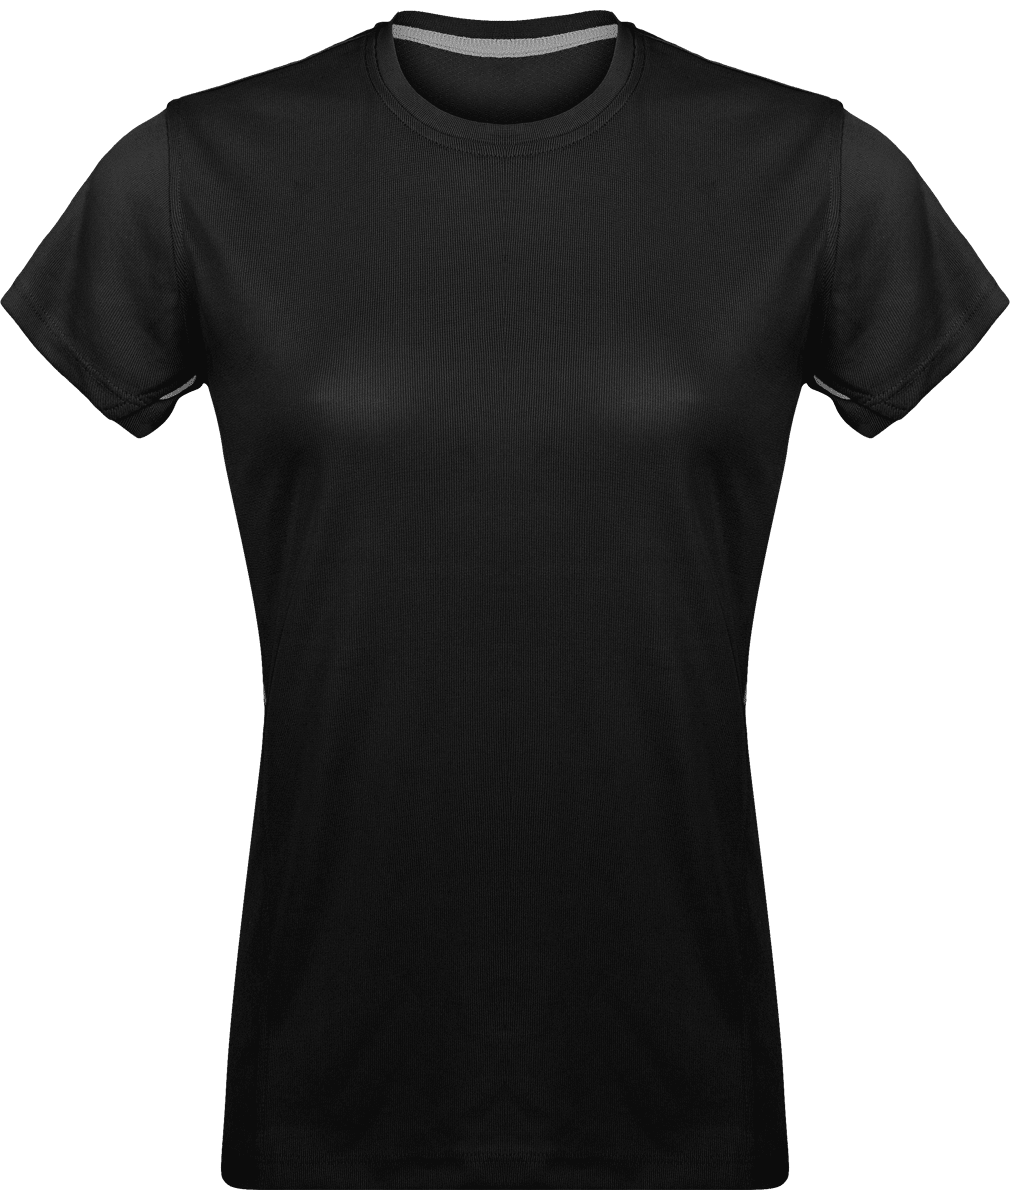 Women's Sports T-Shirt | Light And Breathable | Bi-Material Black / Silver